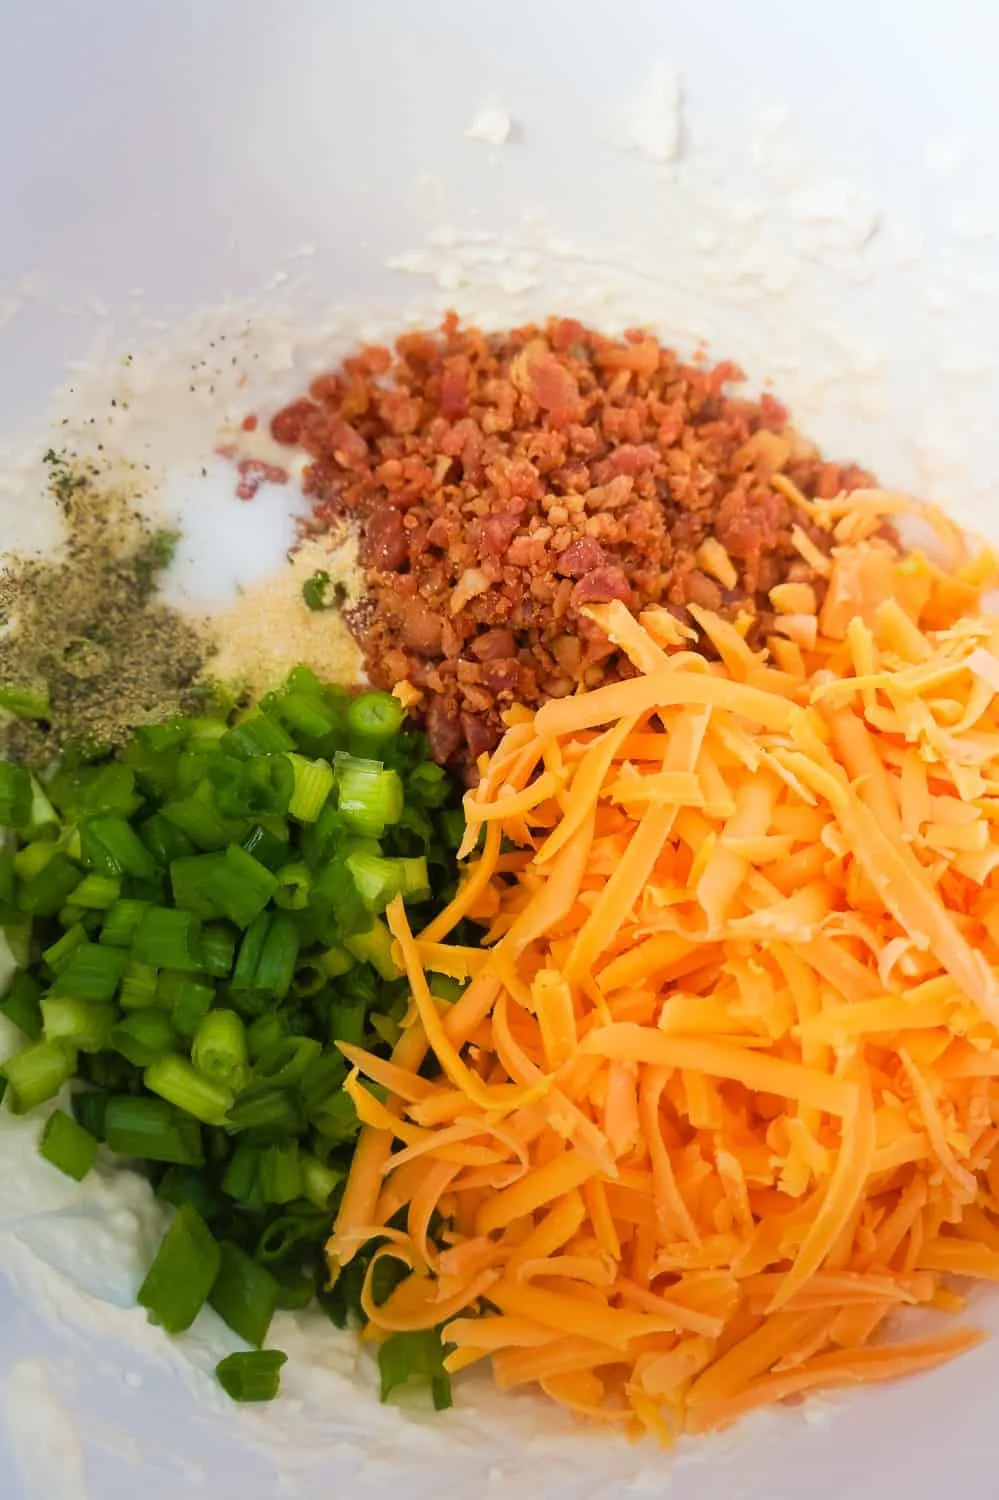 shredded cheddar cheese, real bacon bits and chopped green onions in a mixing bowl